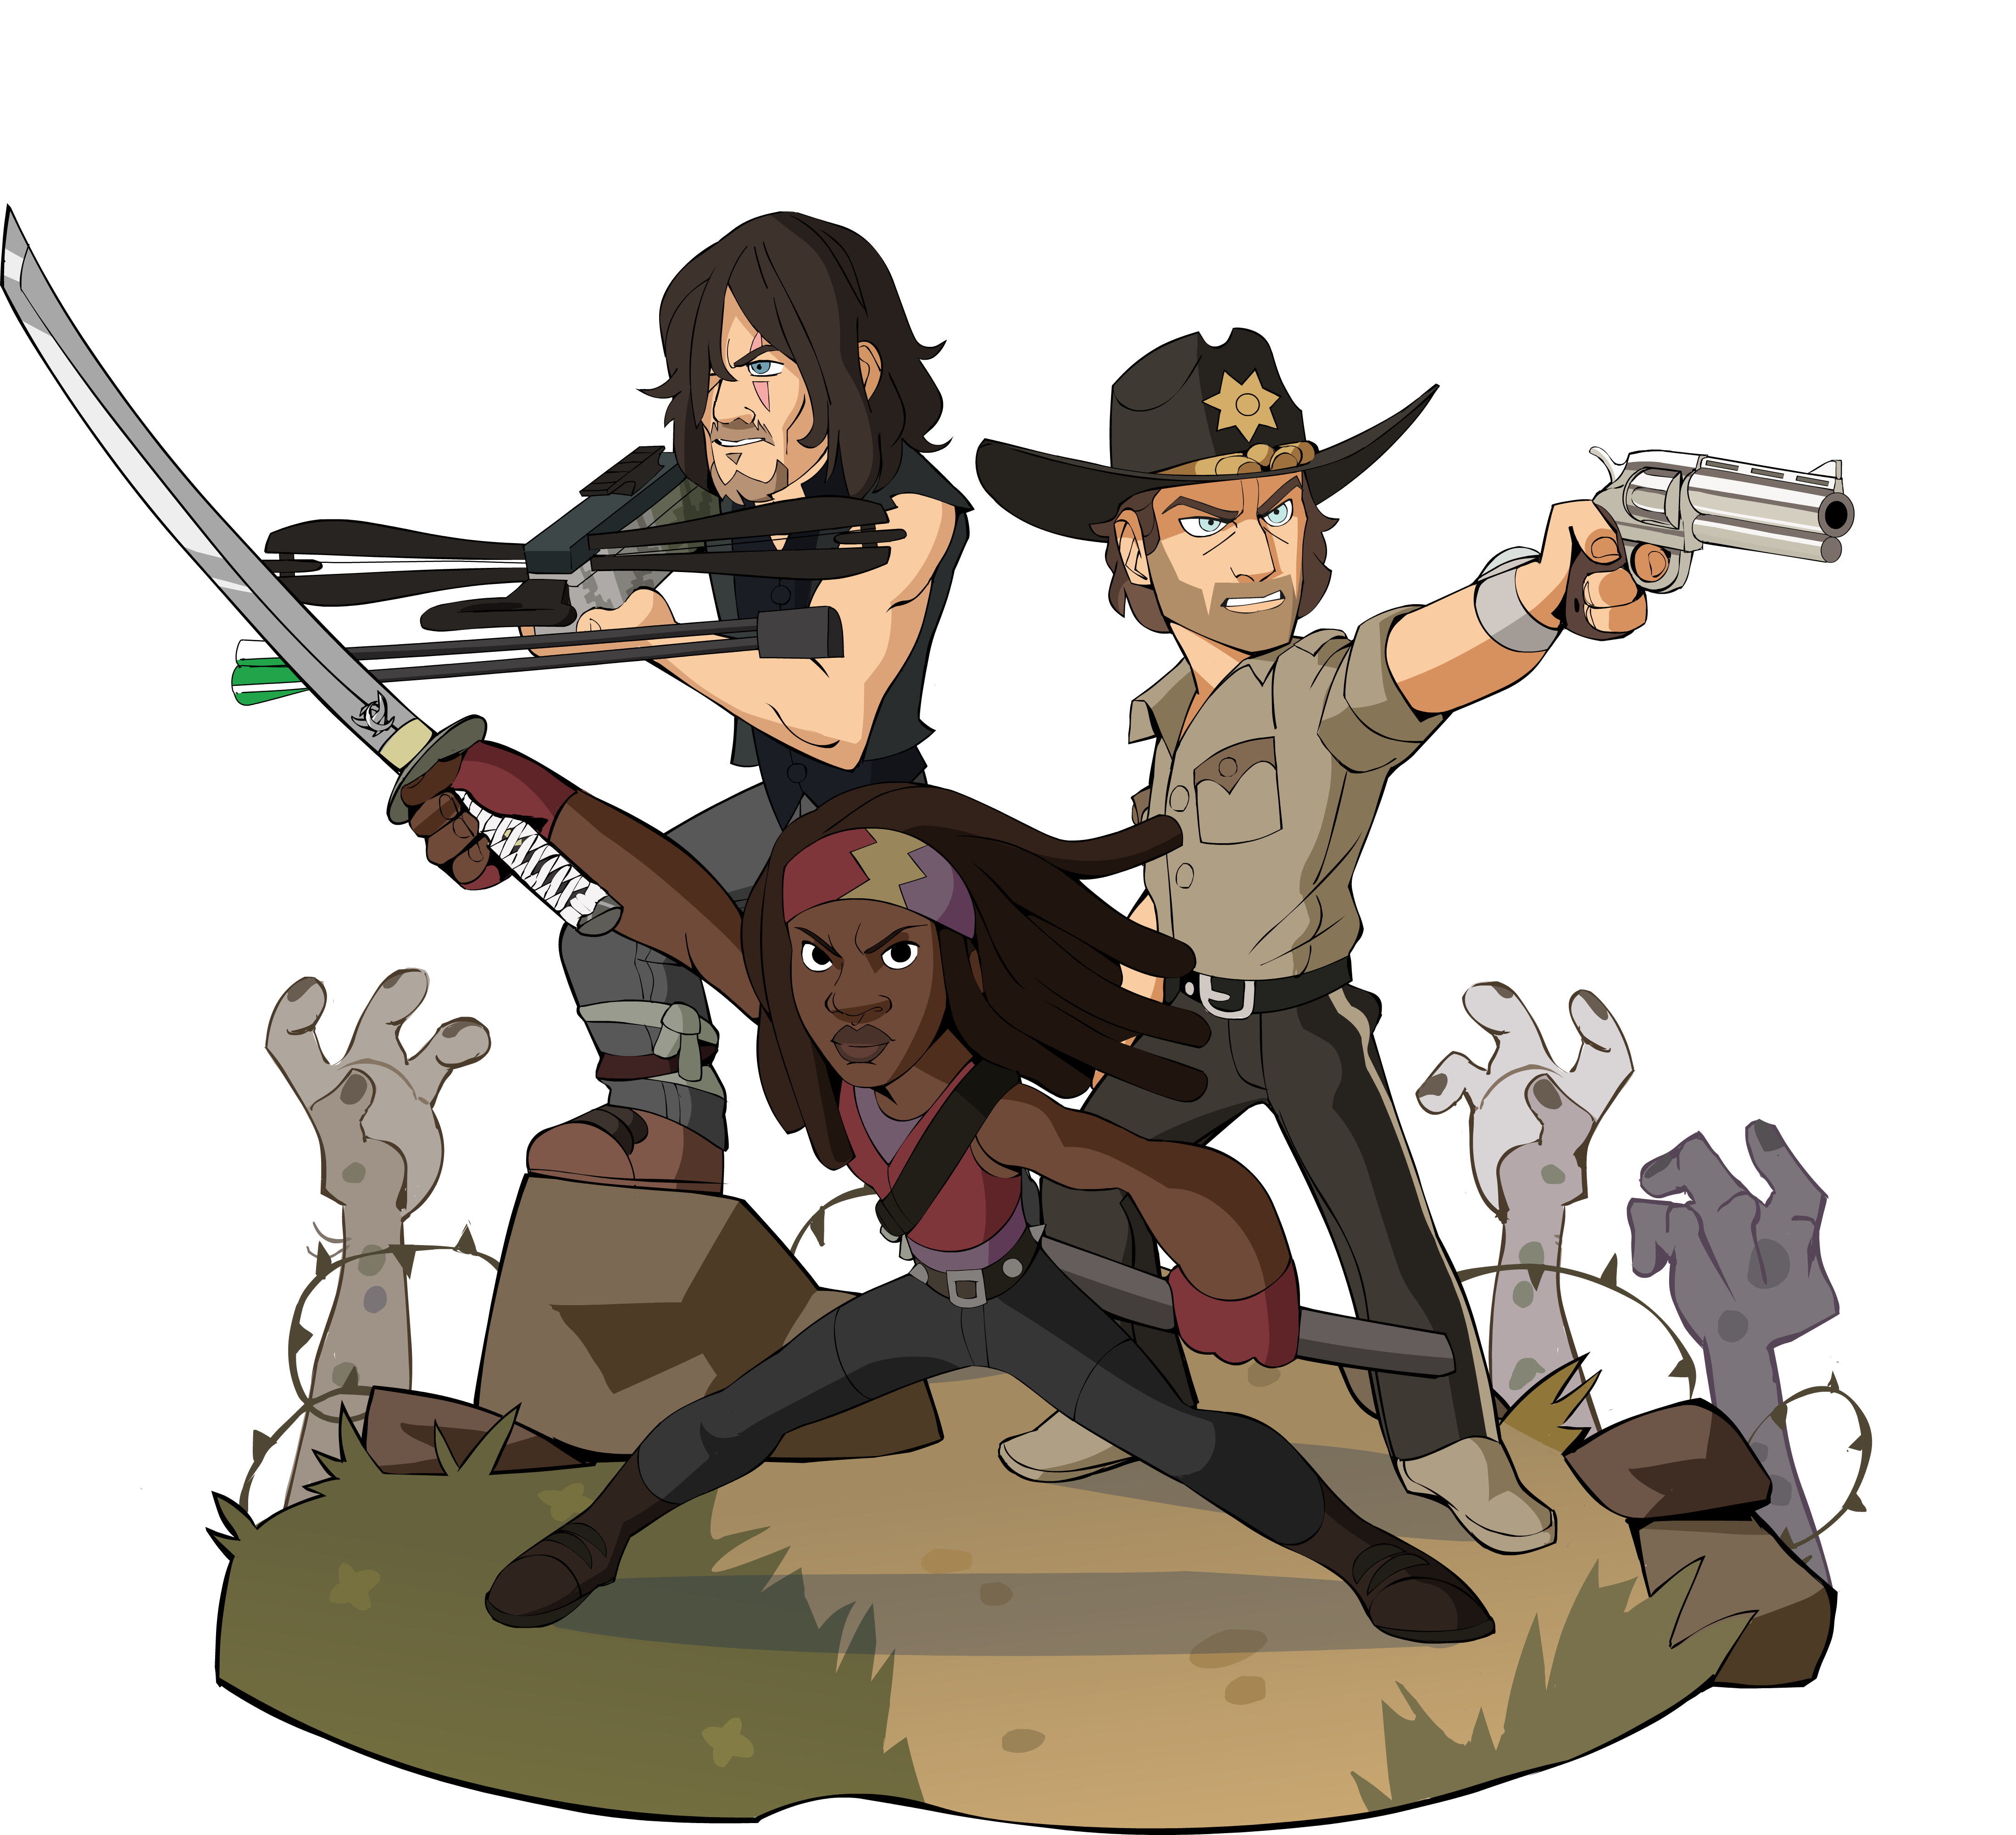  | Brawlhalla welcomes Michonne, Rick Grimes and Daryl Dixon  from The Walking Dead